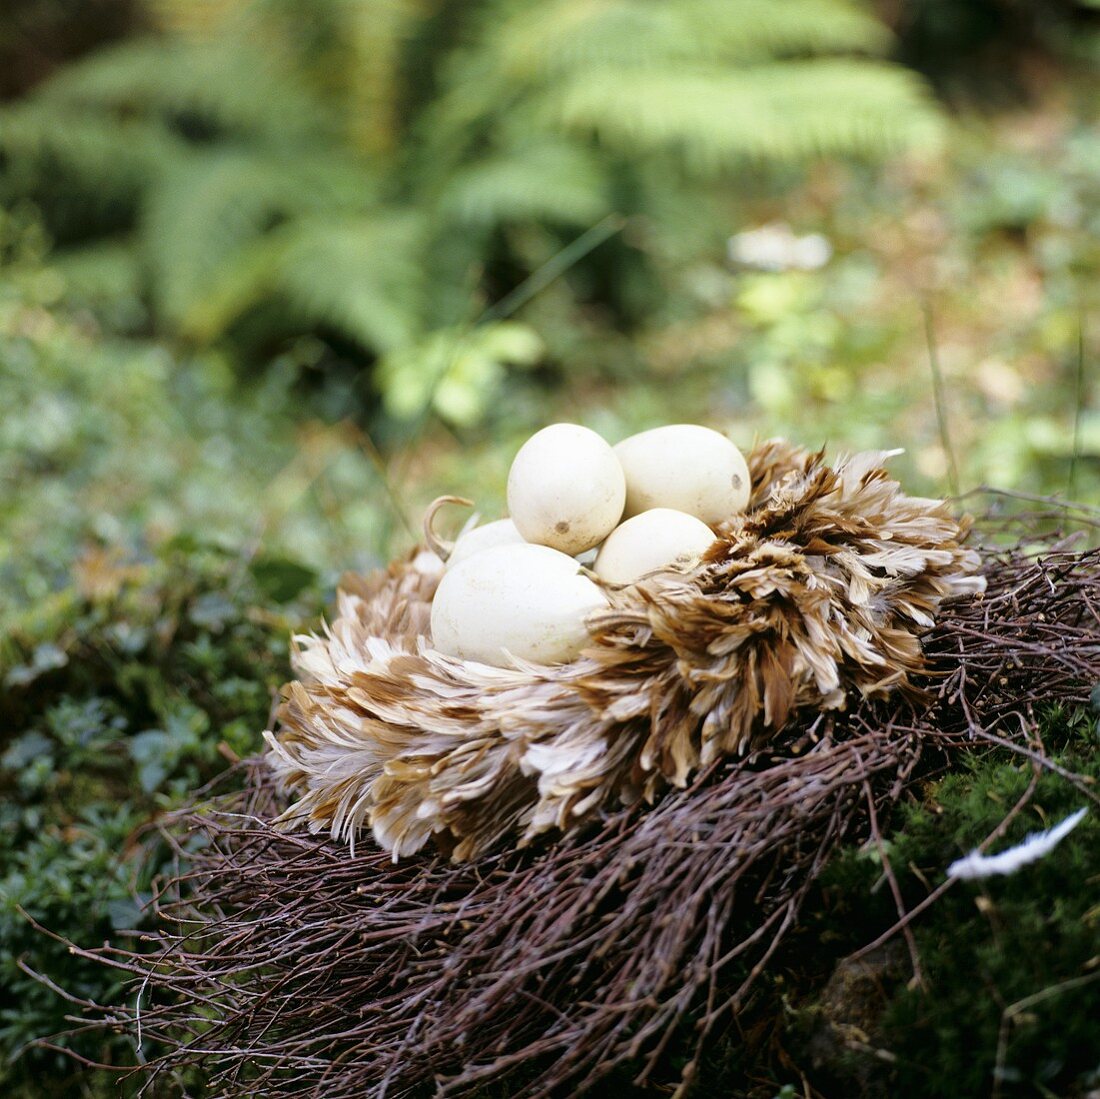 White squashes in nest of twigs and feathers